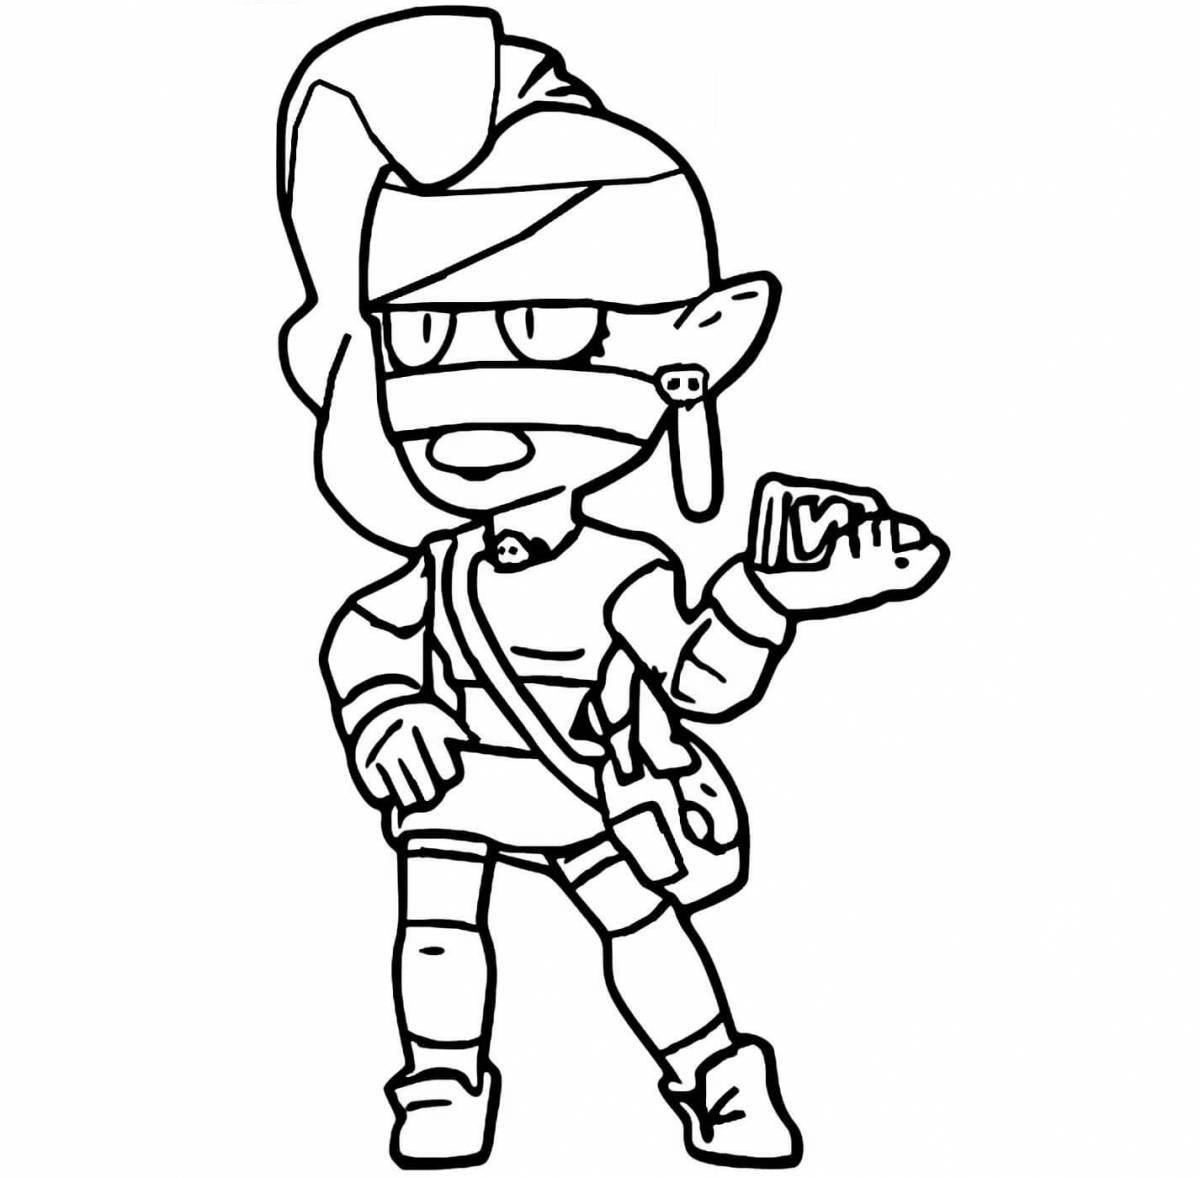 Brawl stars colorful skins coloring pages